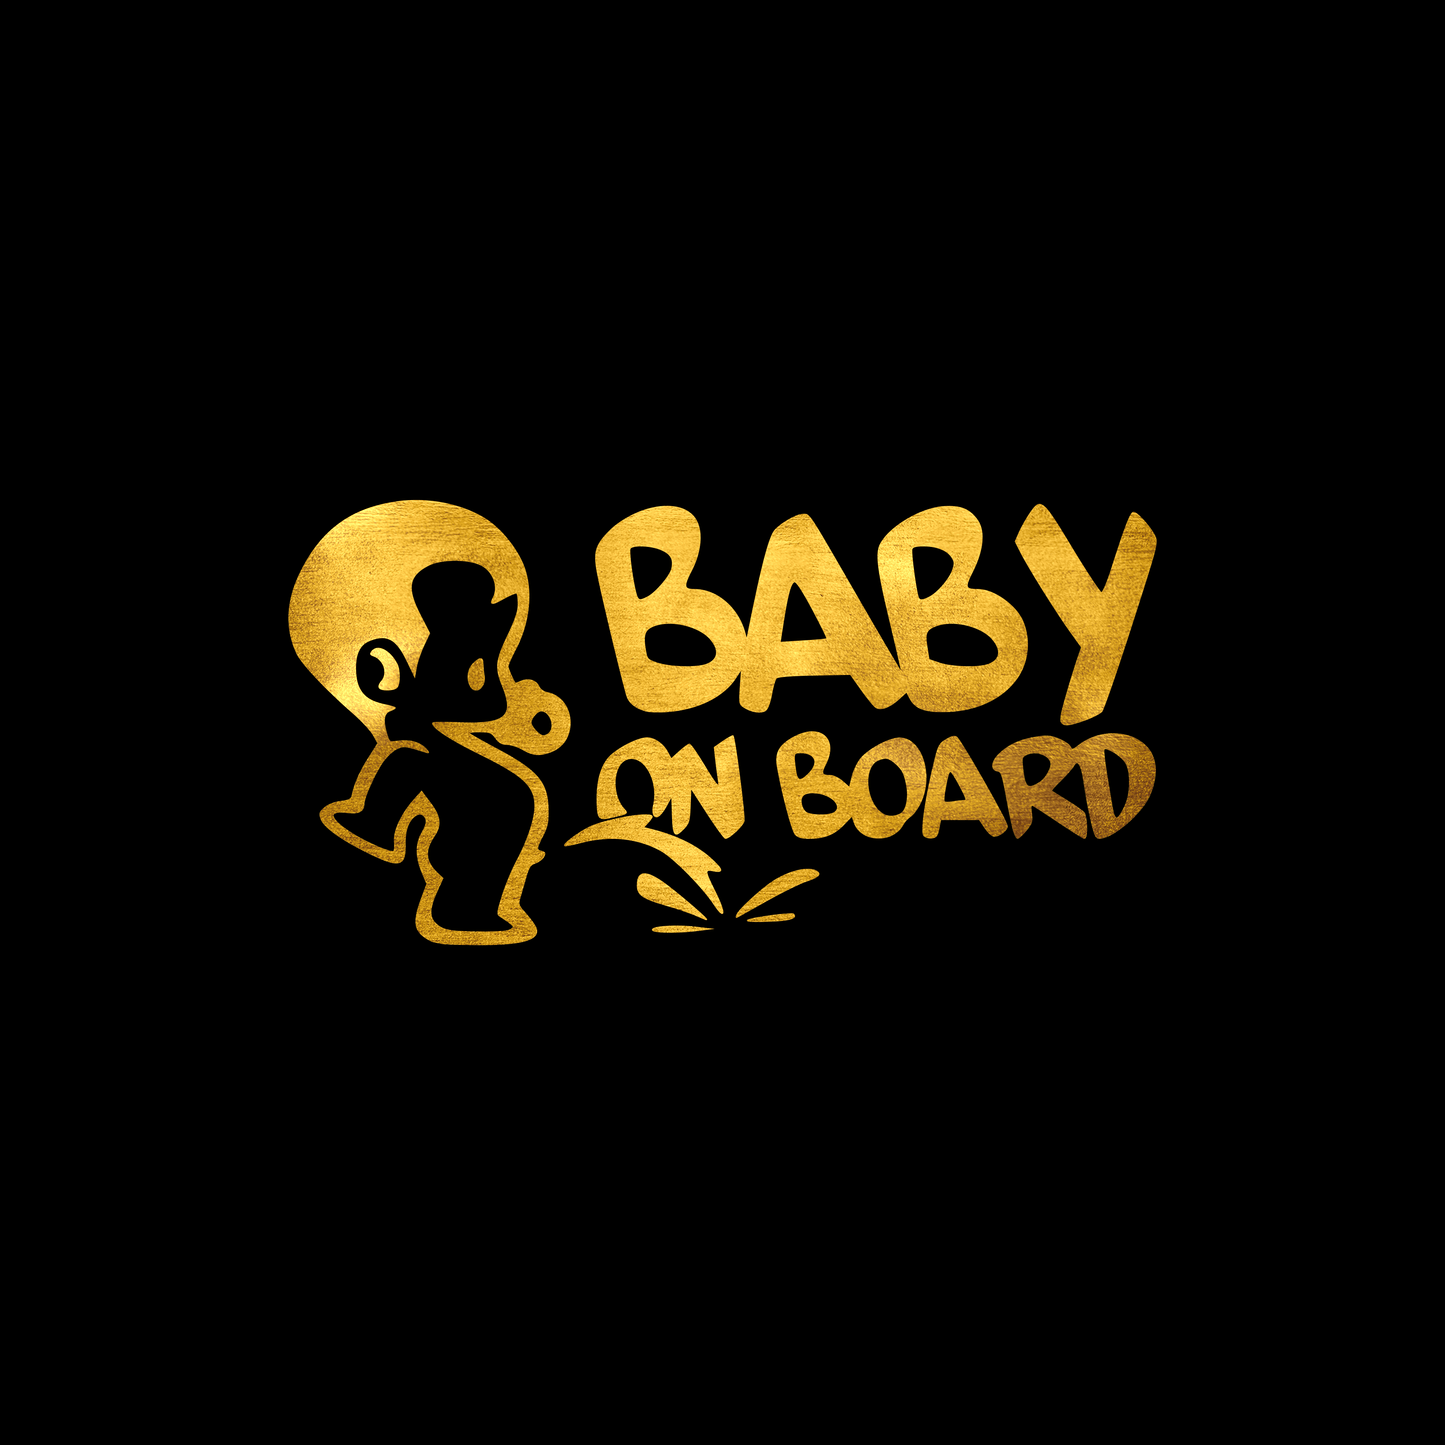 Baby on board 2 sticker decal